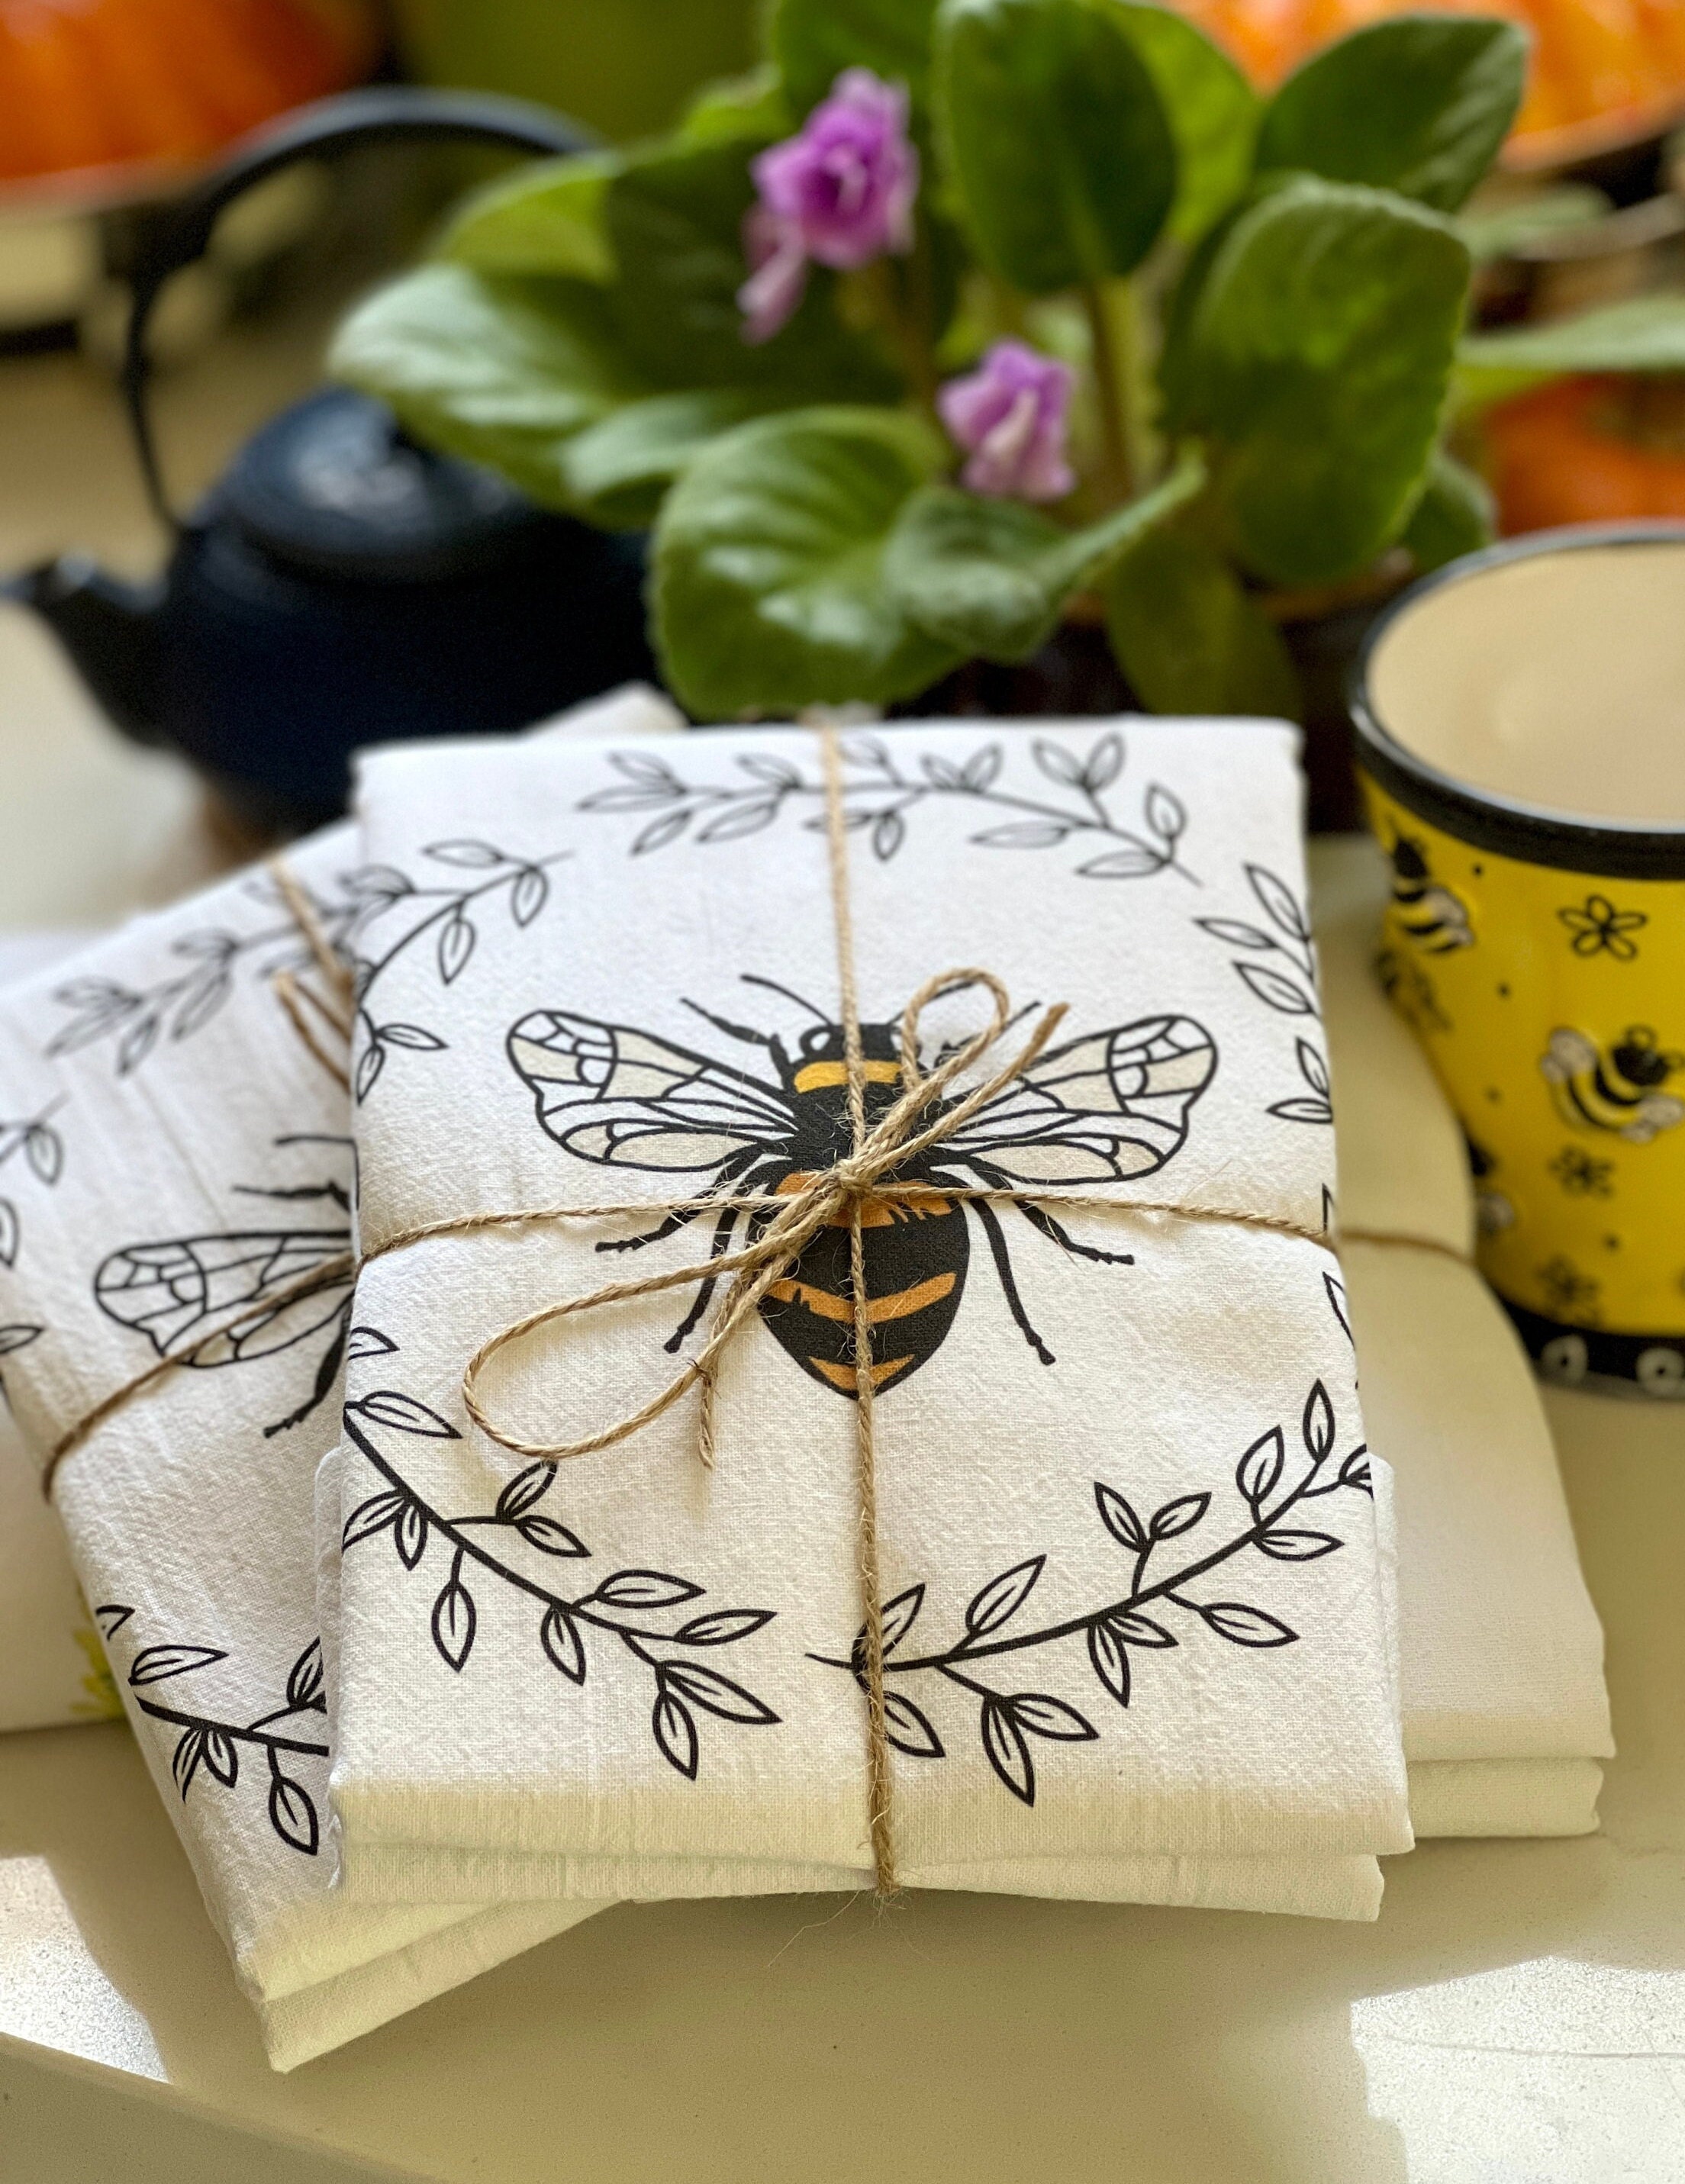 Kitchen Towel Tan It's Good to Be Queen – It's All About Bees!